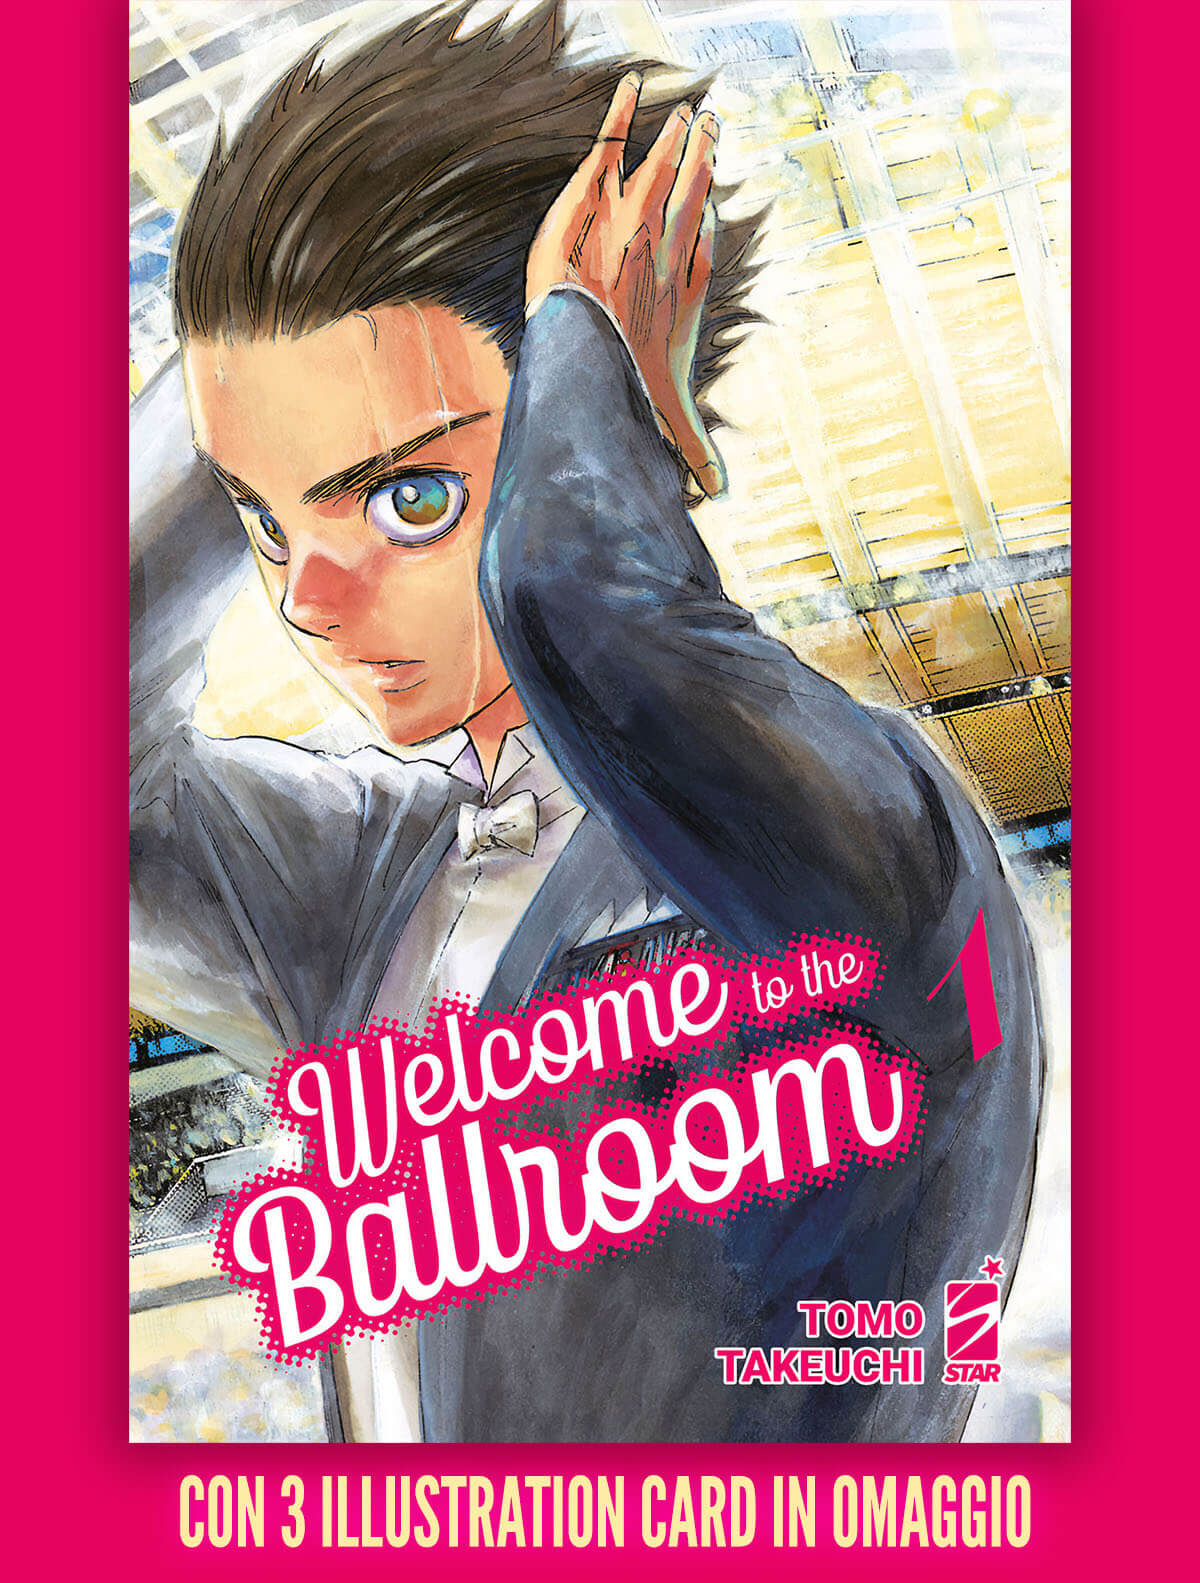 WELCOME TO THE BALLROOM 1 + OMAGGIO